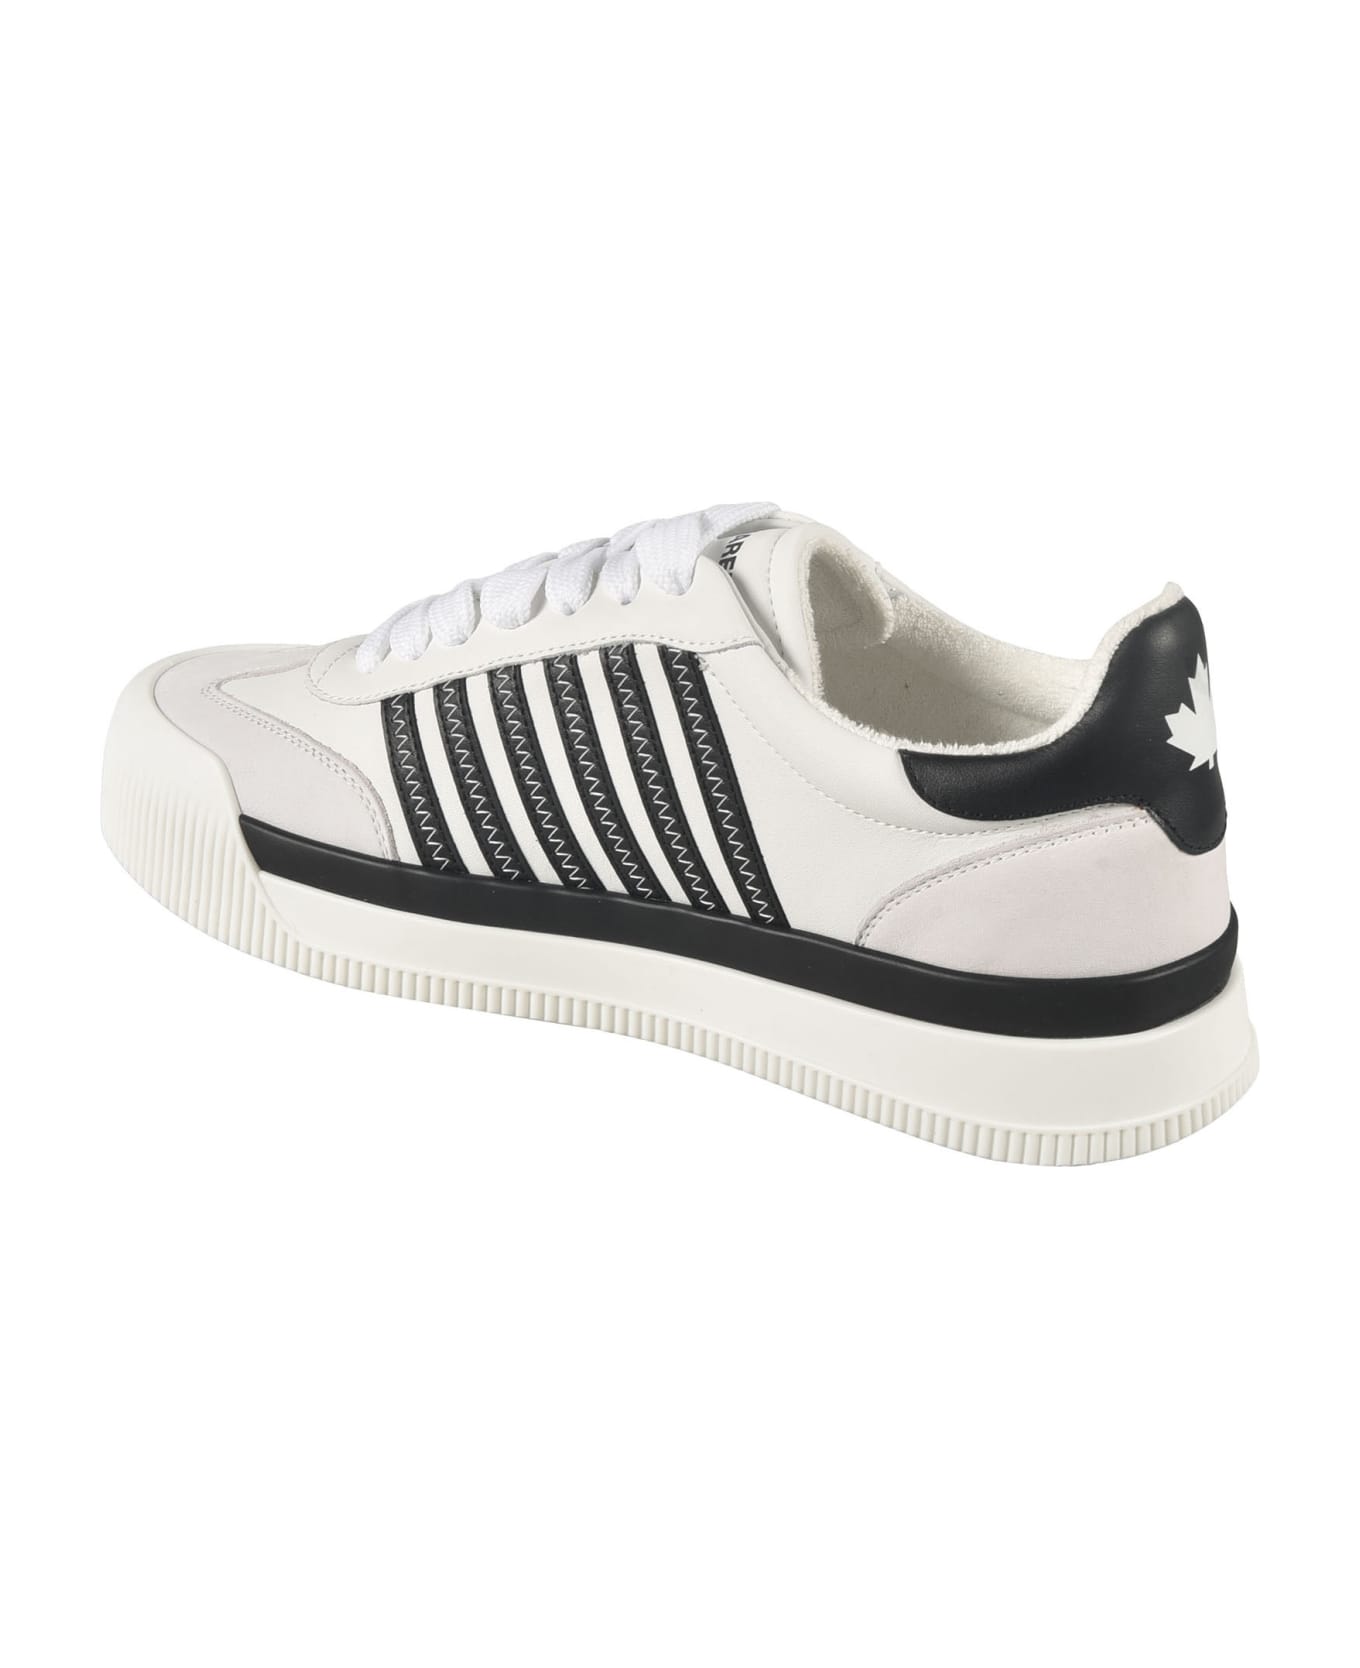 Dsquared2 New Jersey Sneakers - White/Black